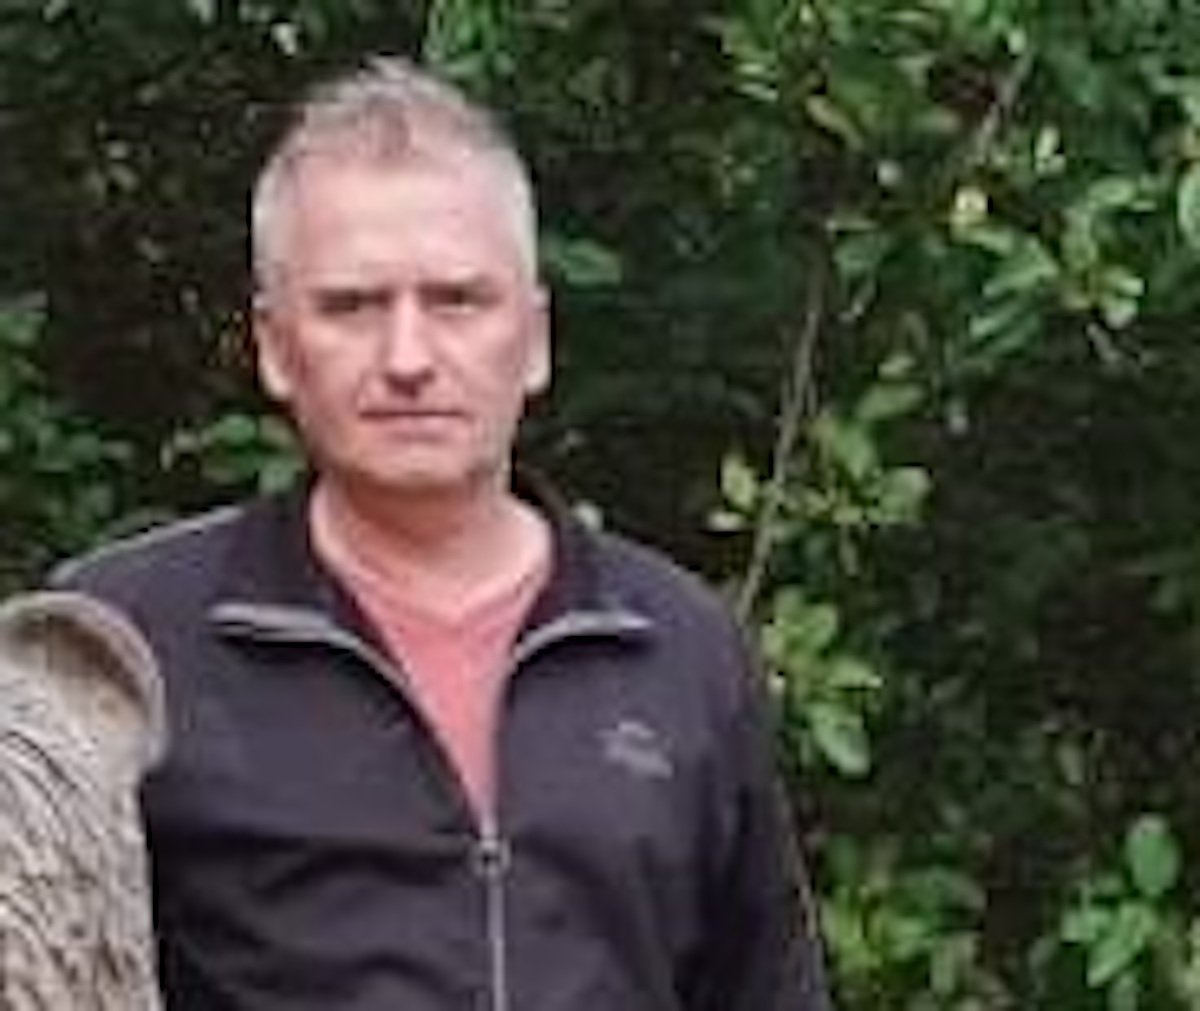 Pictured is 58-year-old Saulius Badgziuna, who was fatally wounded on Monday 14 March.